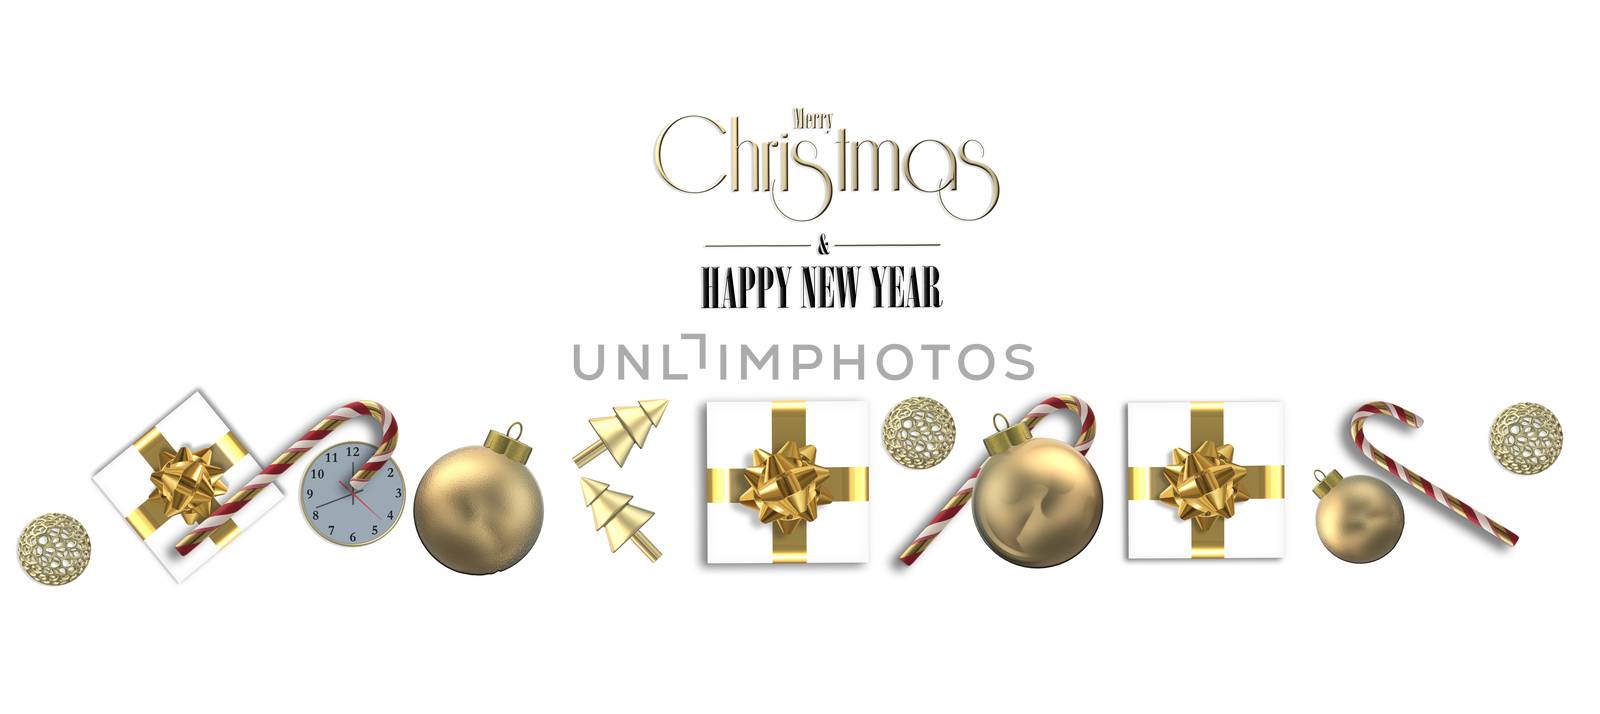 Christmas holiday border with 3D realistic golden Xmas symbols on white. Shiny gold ball bauble, gold abstract tree, Xmas cane, gift boxes with golden bow. 3D render. Horizontal holiday festive border